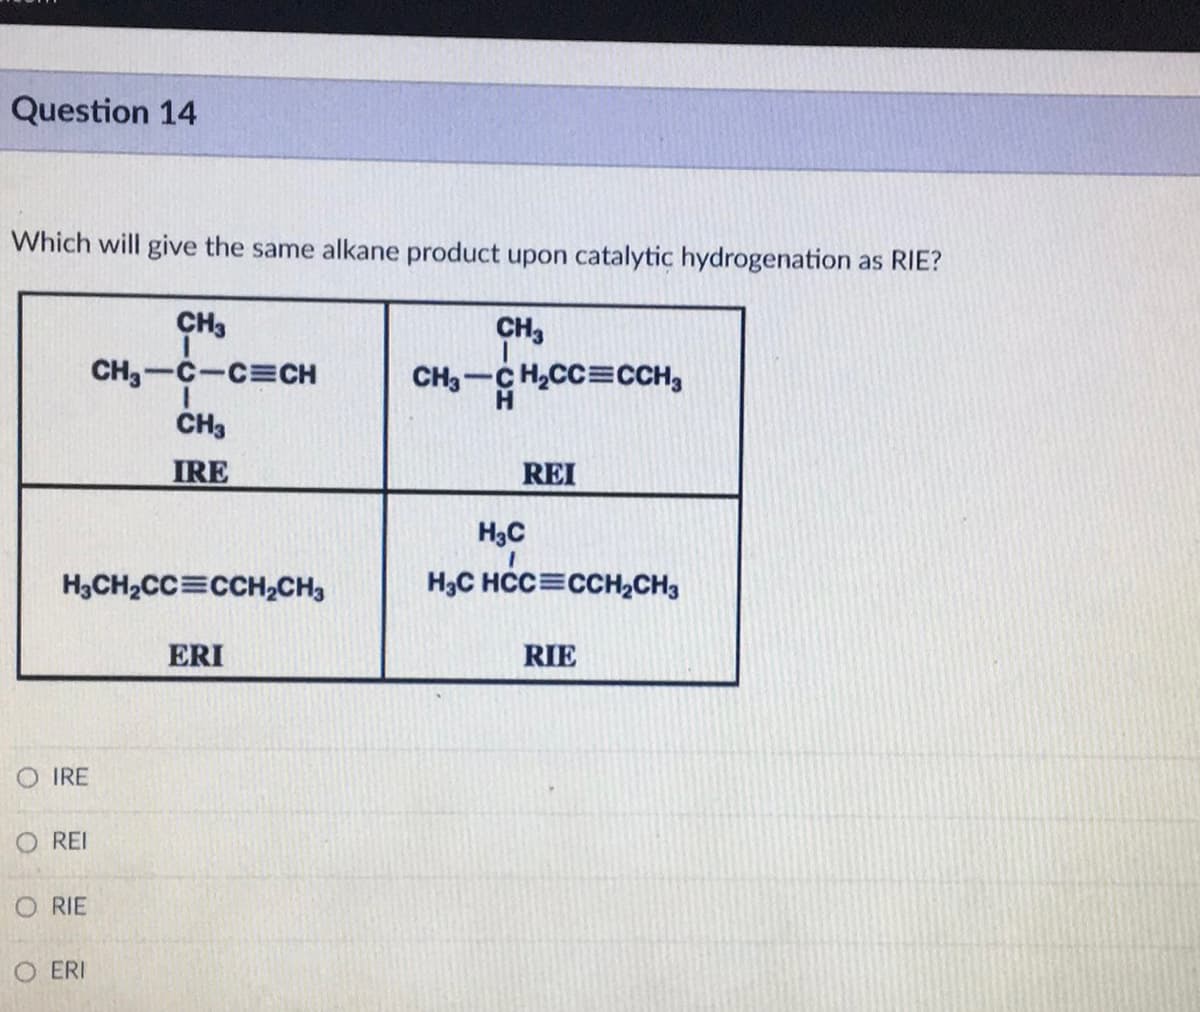 Question 14
Which will give the same alkane product upon catalytic hydrogenation as RIE?
CH3
CH3CH₂CC=CCH3
H3CH₂CC CCH₂CH3
OIRE
REI
ORIE
CH3
CH₂-C-C CH
1
CH3
IRE
O ERI
ERI
REI
H₂C
H3C HCC CCH₂CH3
RIE